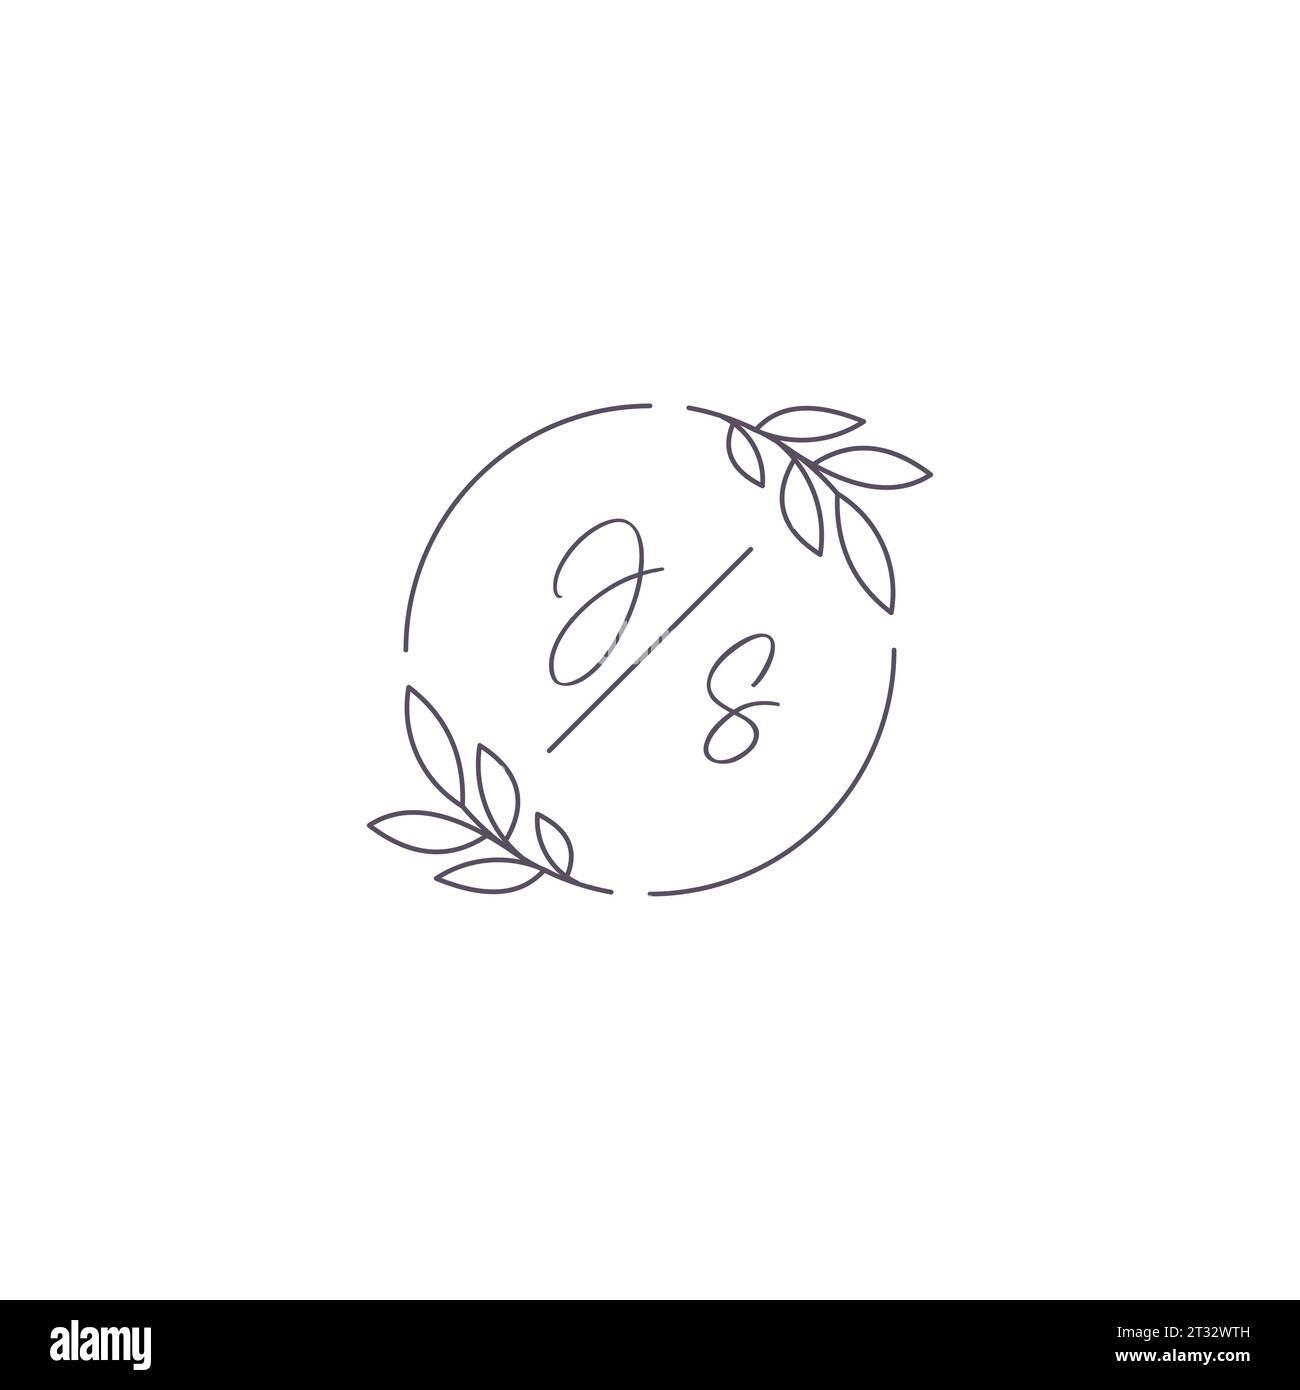 Initials JS monogram wedding logo with simple leaf outline and circle style vector graphic Stock Vector